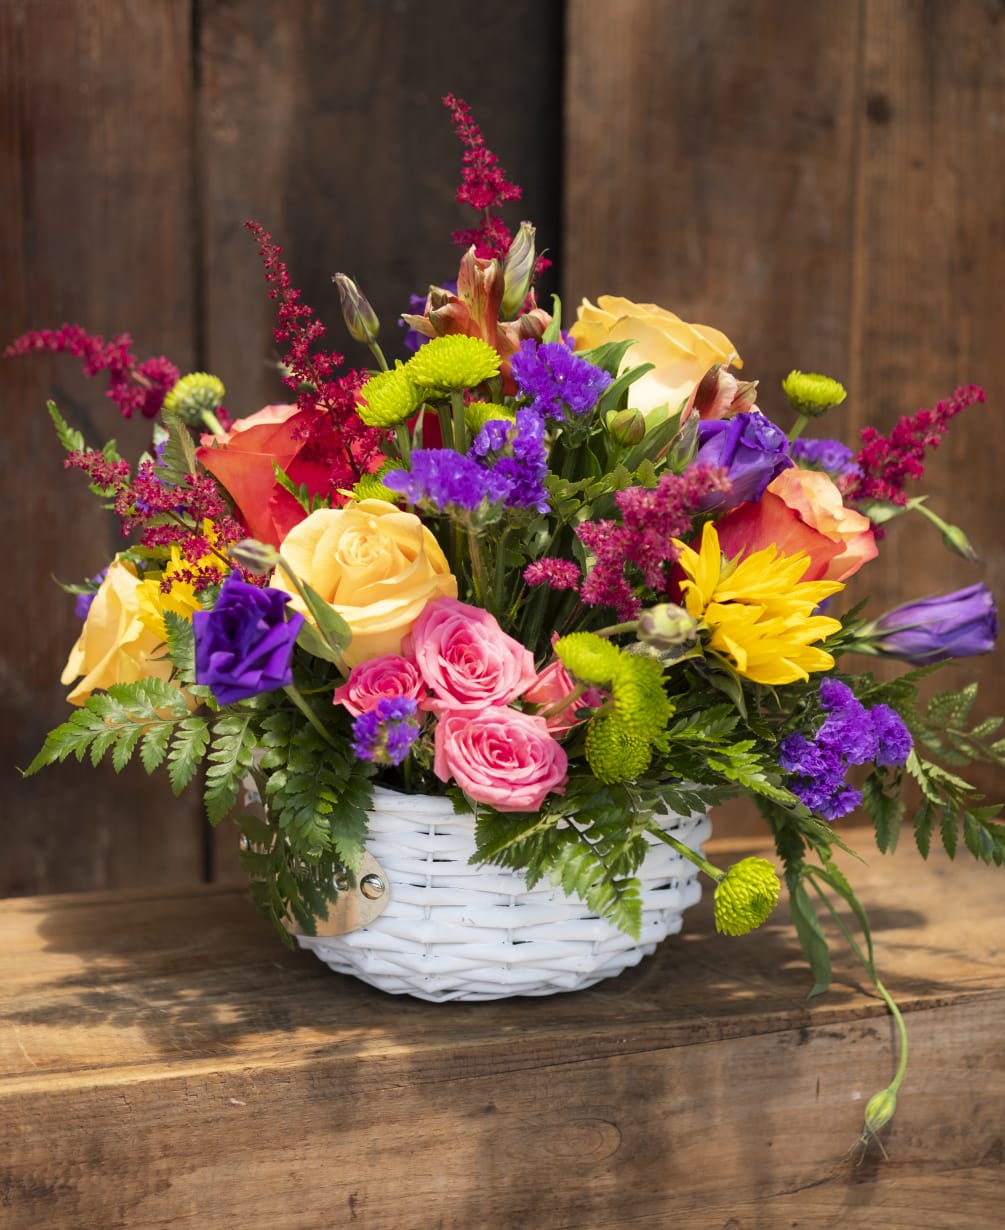 This artisan arrangement overall theme is bright bold colors.  The actual